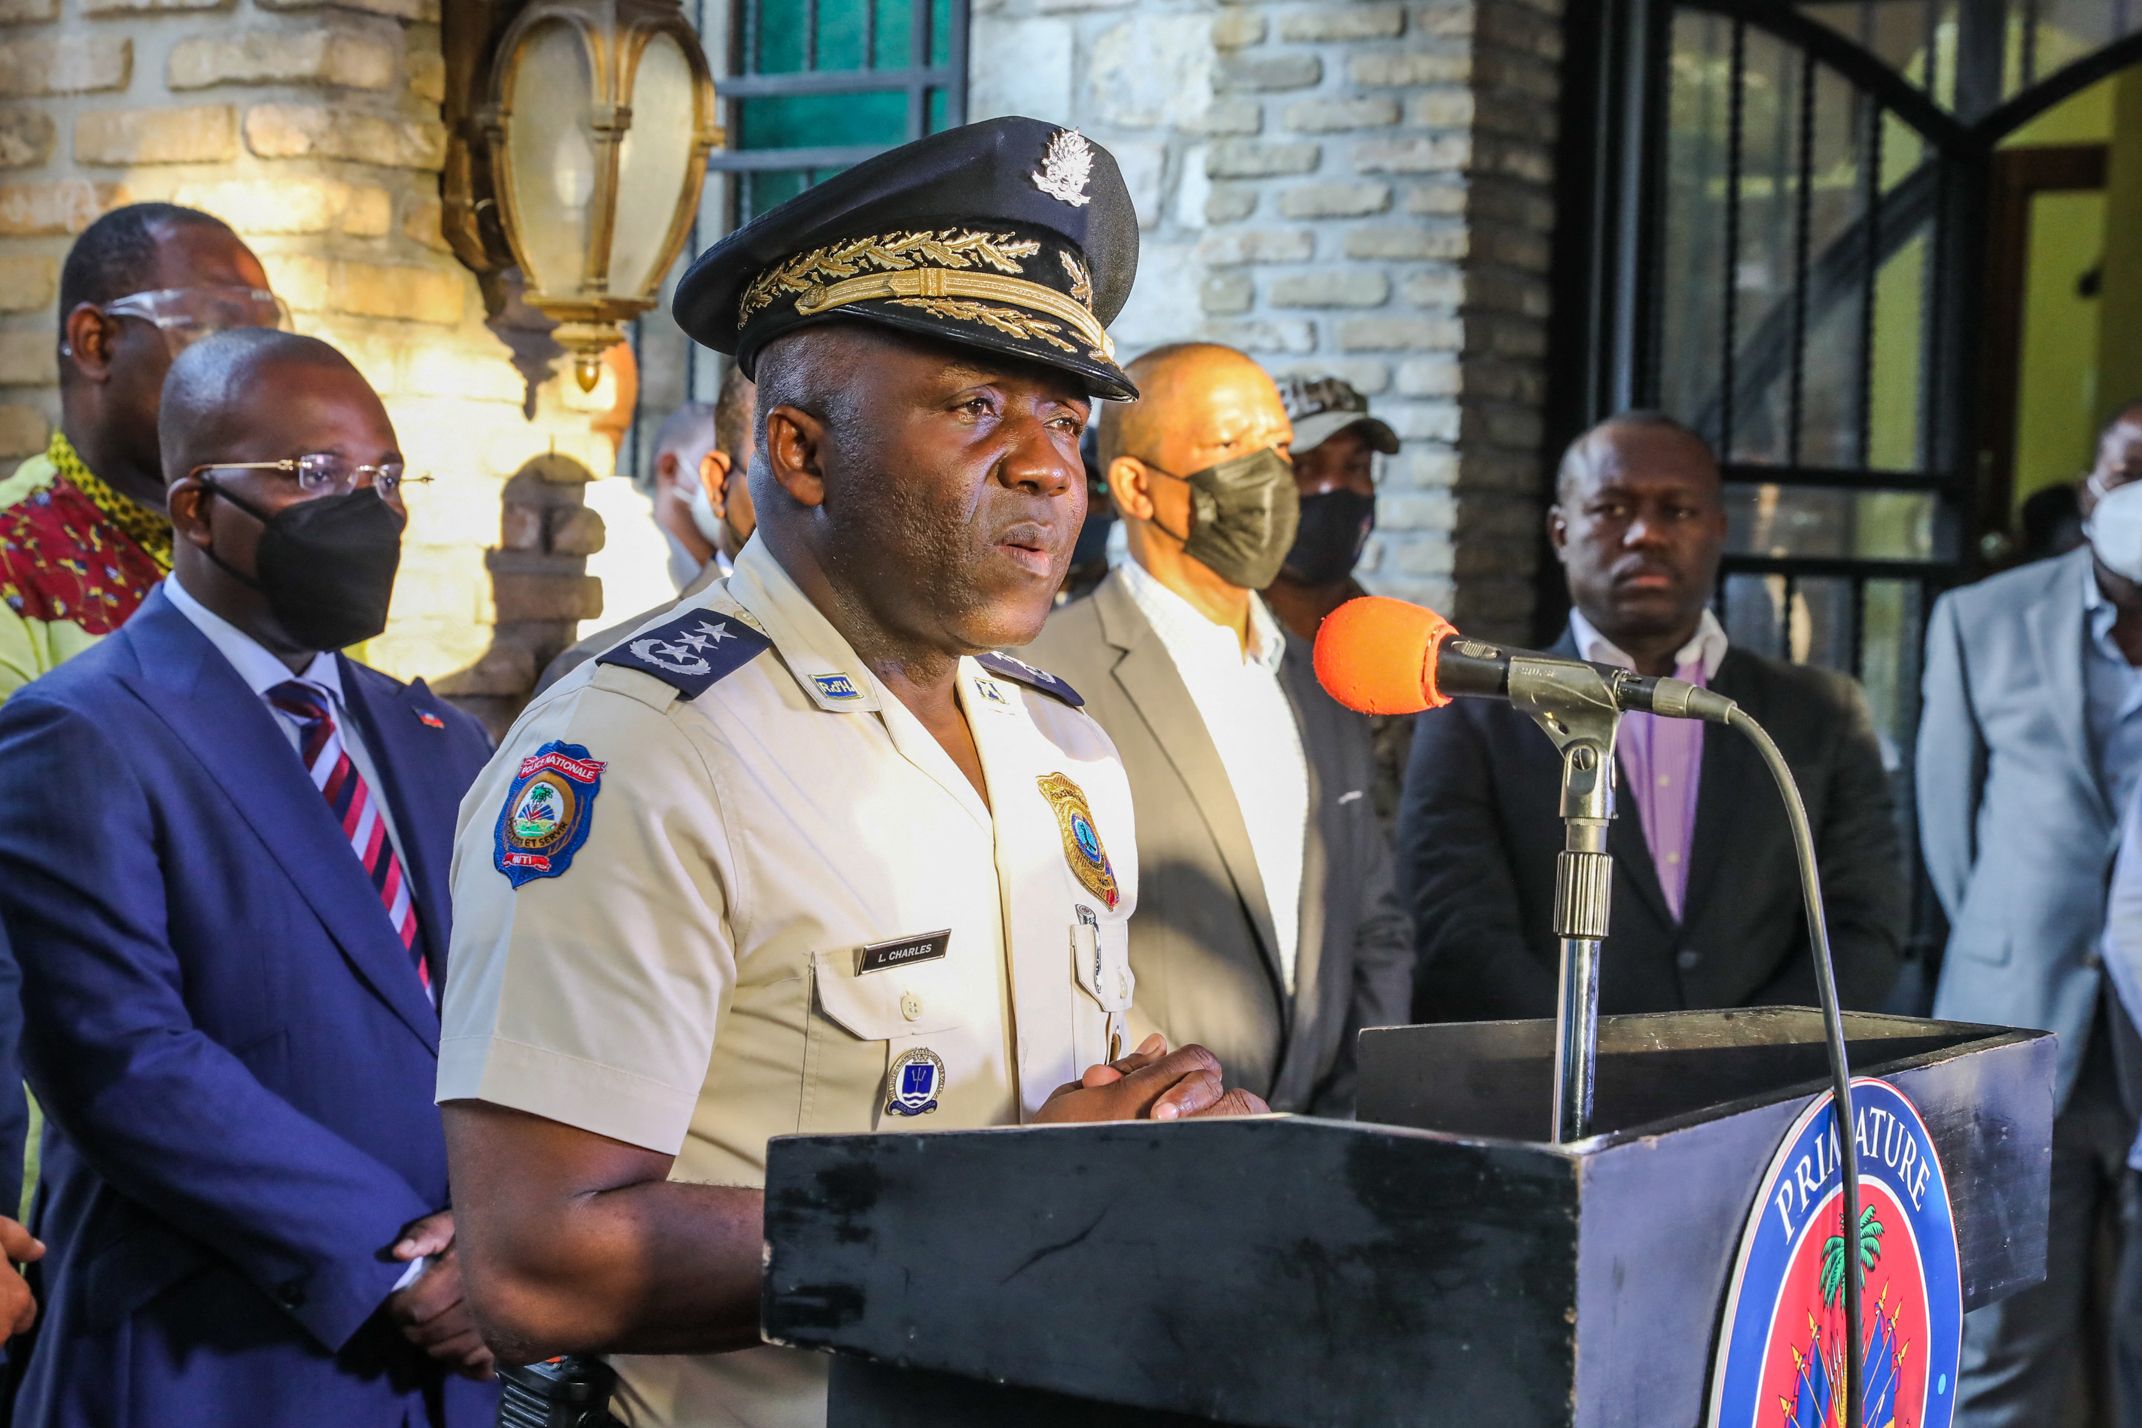 PHOTO: Leon Charles, head of the Haitian National Police, speaks during a press conference in Port-au Prince, Haiti, on July 11, 2021.